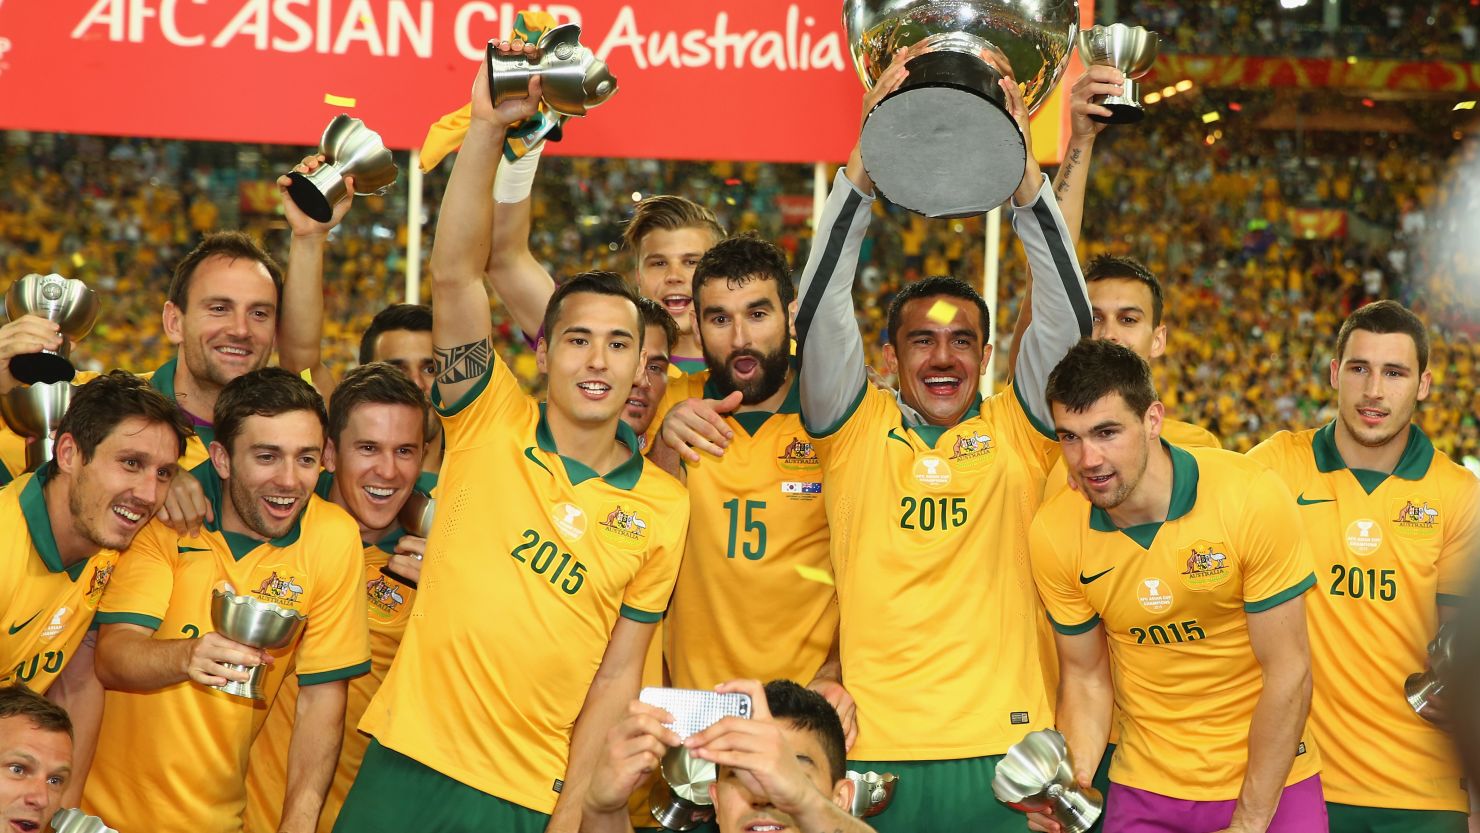 Australia won their first Asian Cup since joining the AFC in 2005